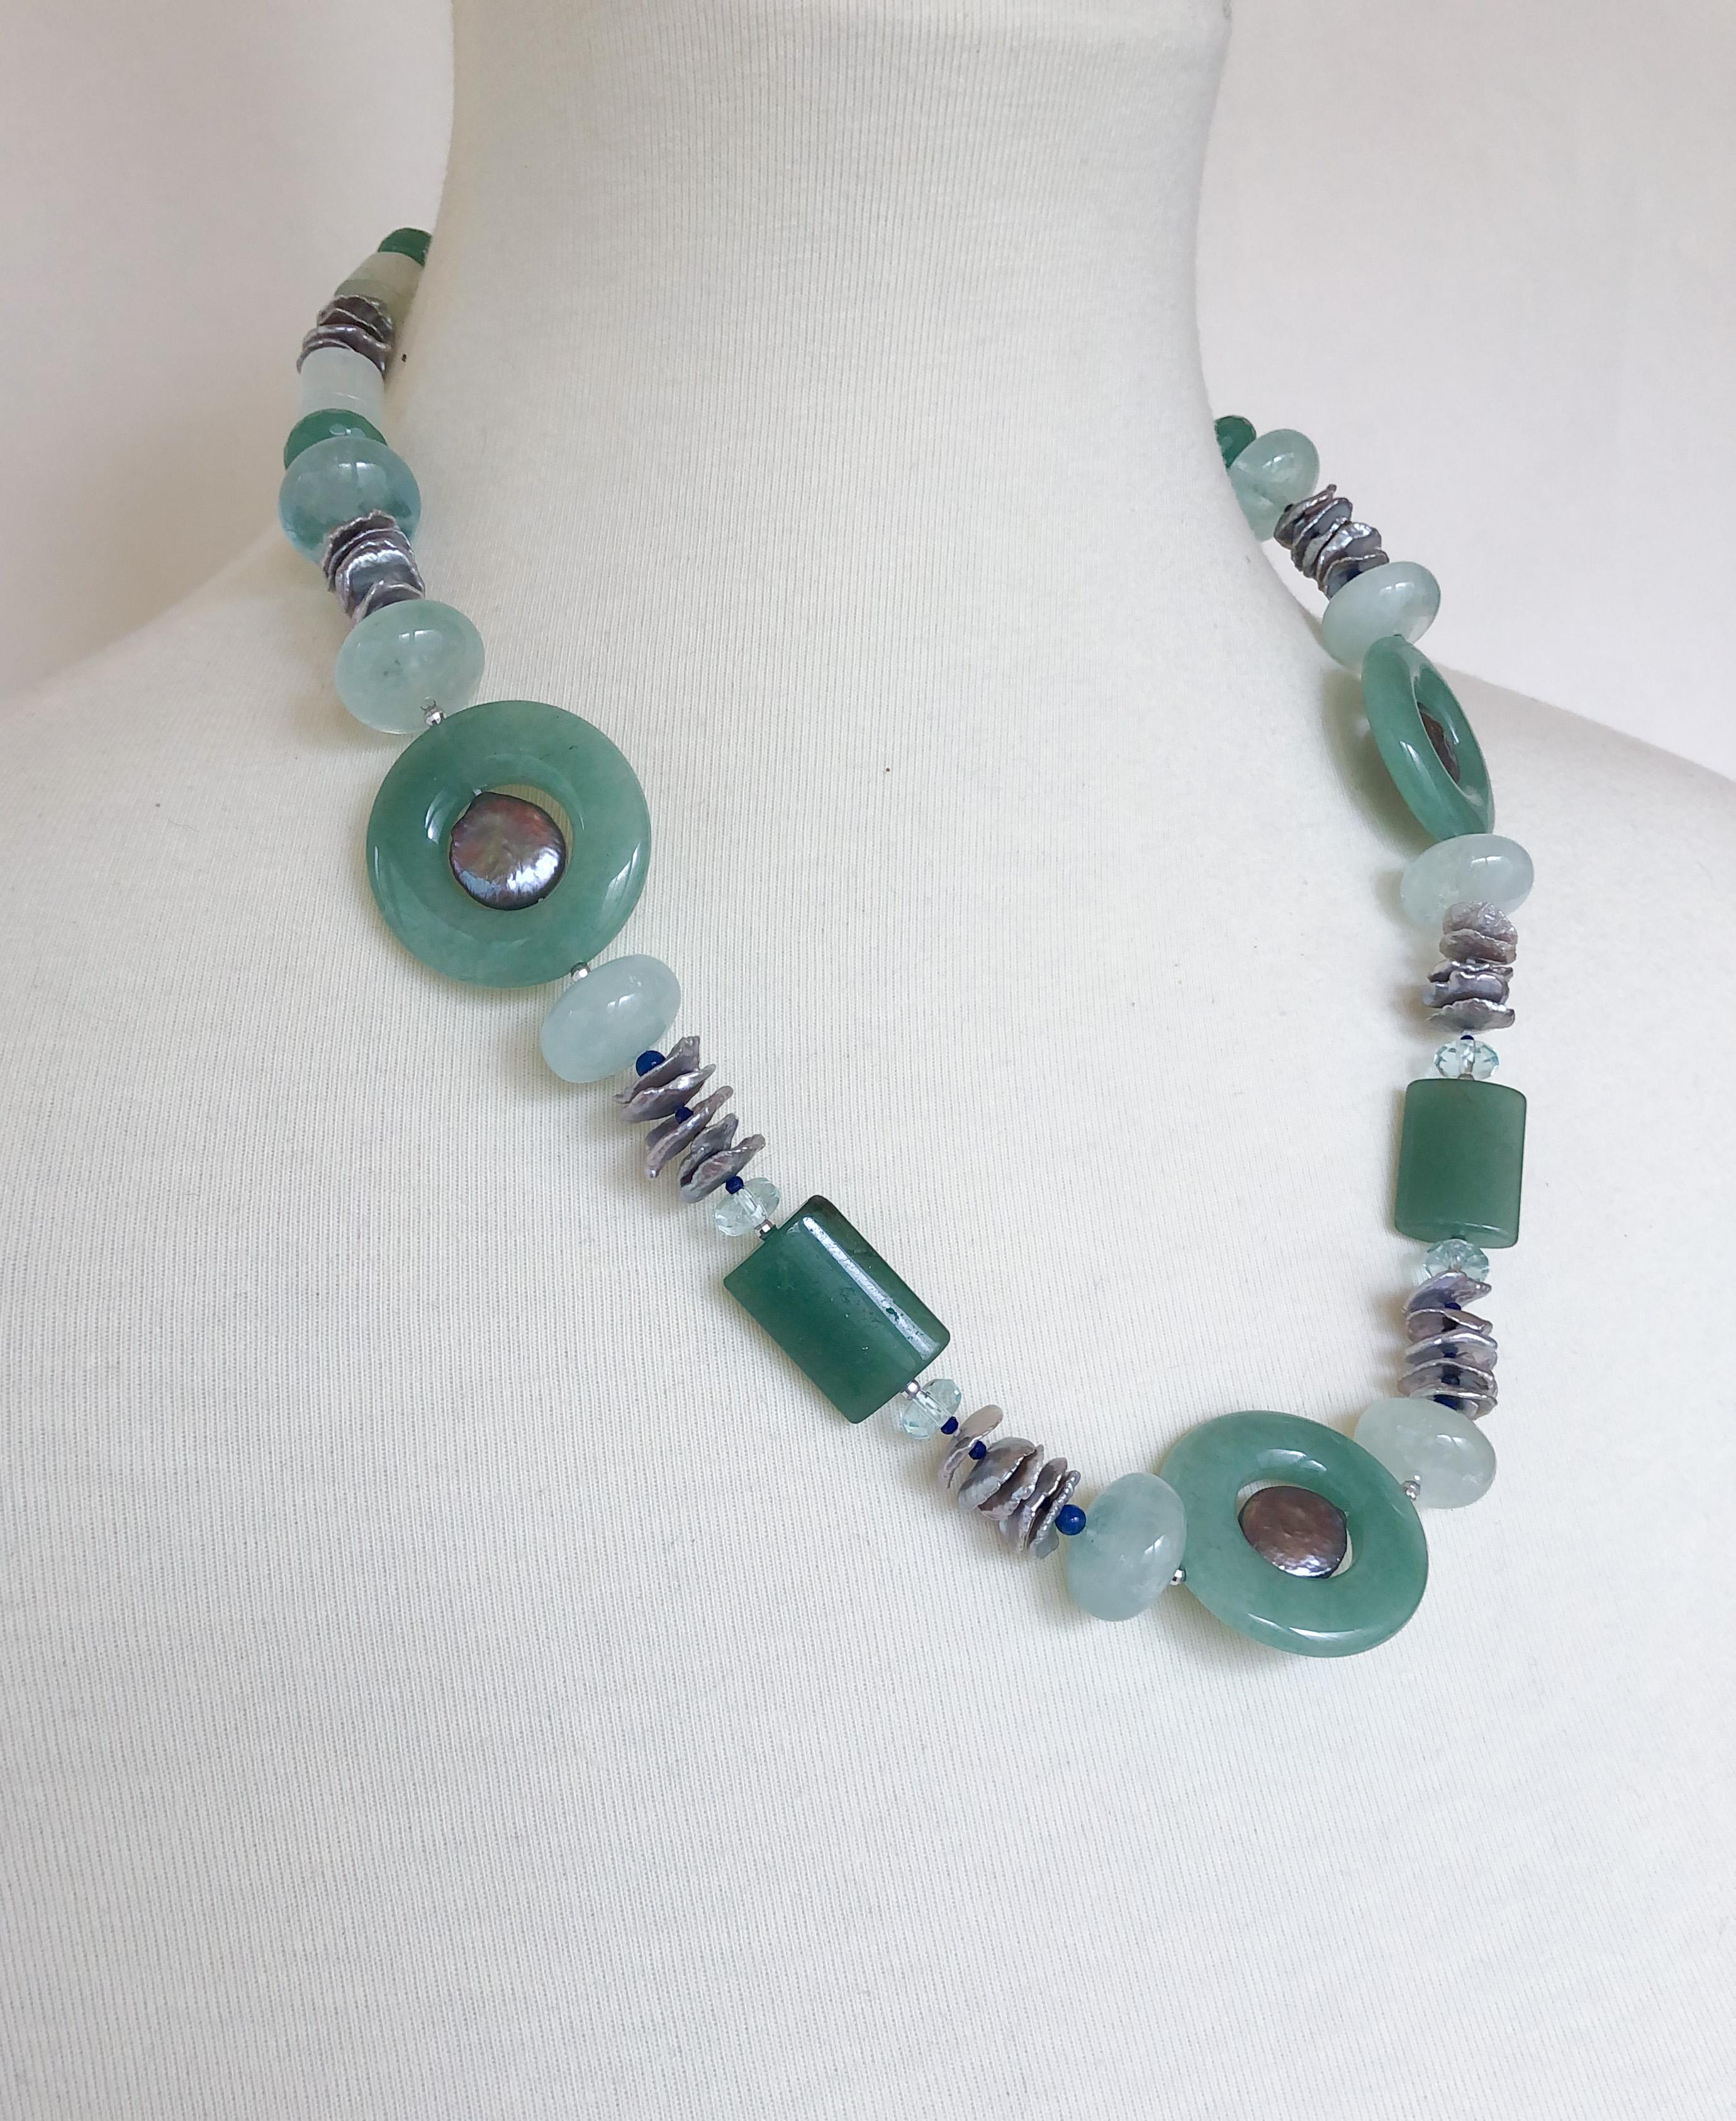 This necklace is made with a jade ring and jade stones, aquamarine stones, and green aventurine stones. The gorgeous greens in this necklace are contrasted by freshwater graded grey pearls and tiny lapis lazuli beads that provide a pop of color. In